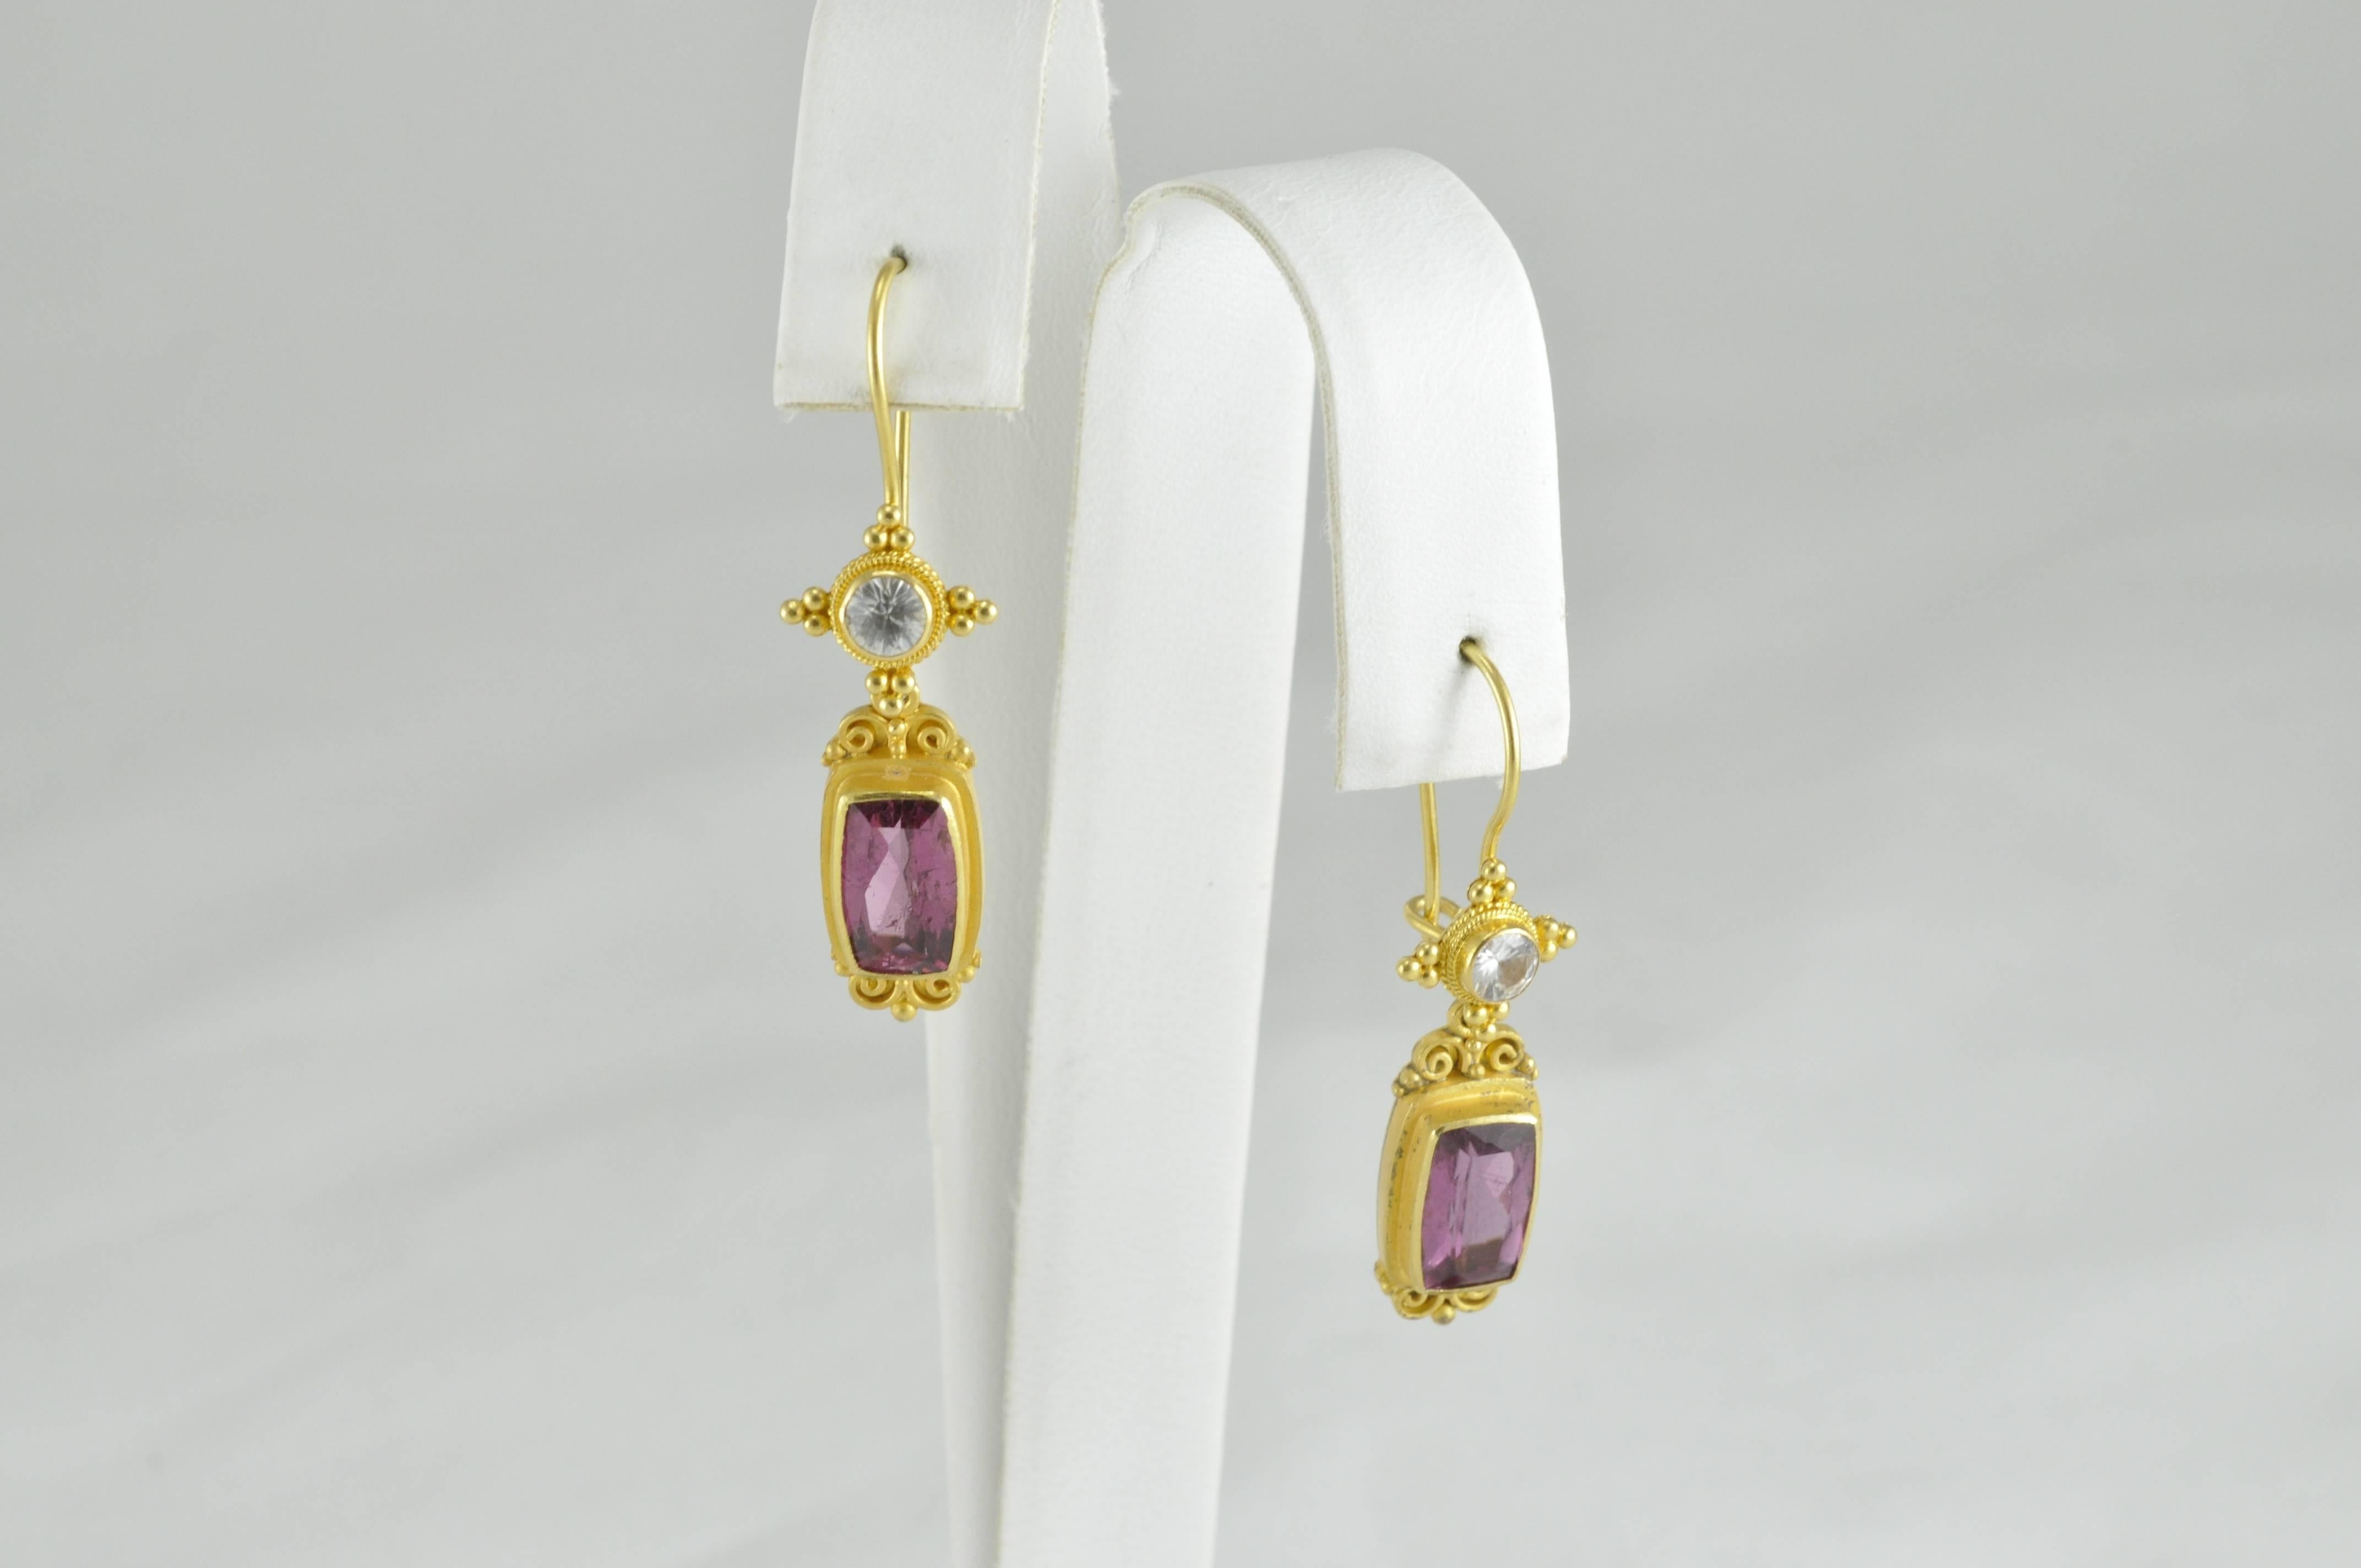 18k Yellow Gold and White Sapphire Tops with Pink Tourmaline Drops designed by Kimarie Designs.